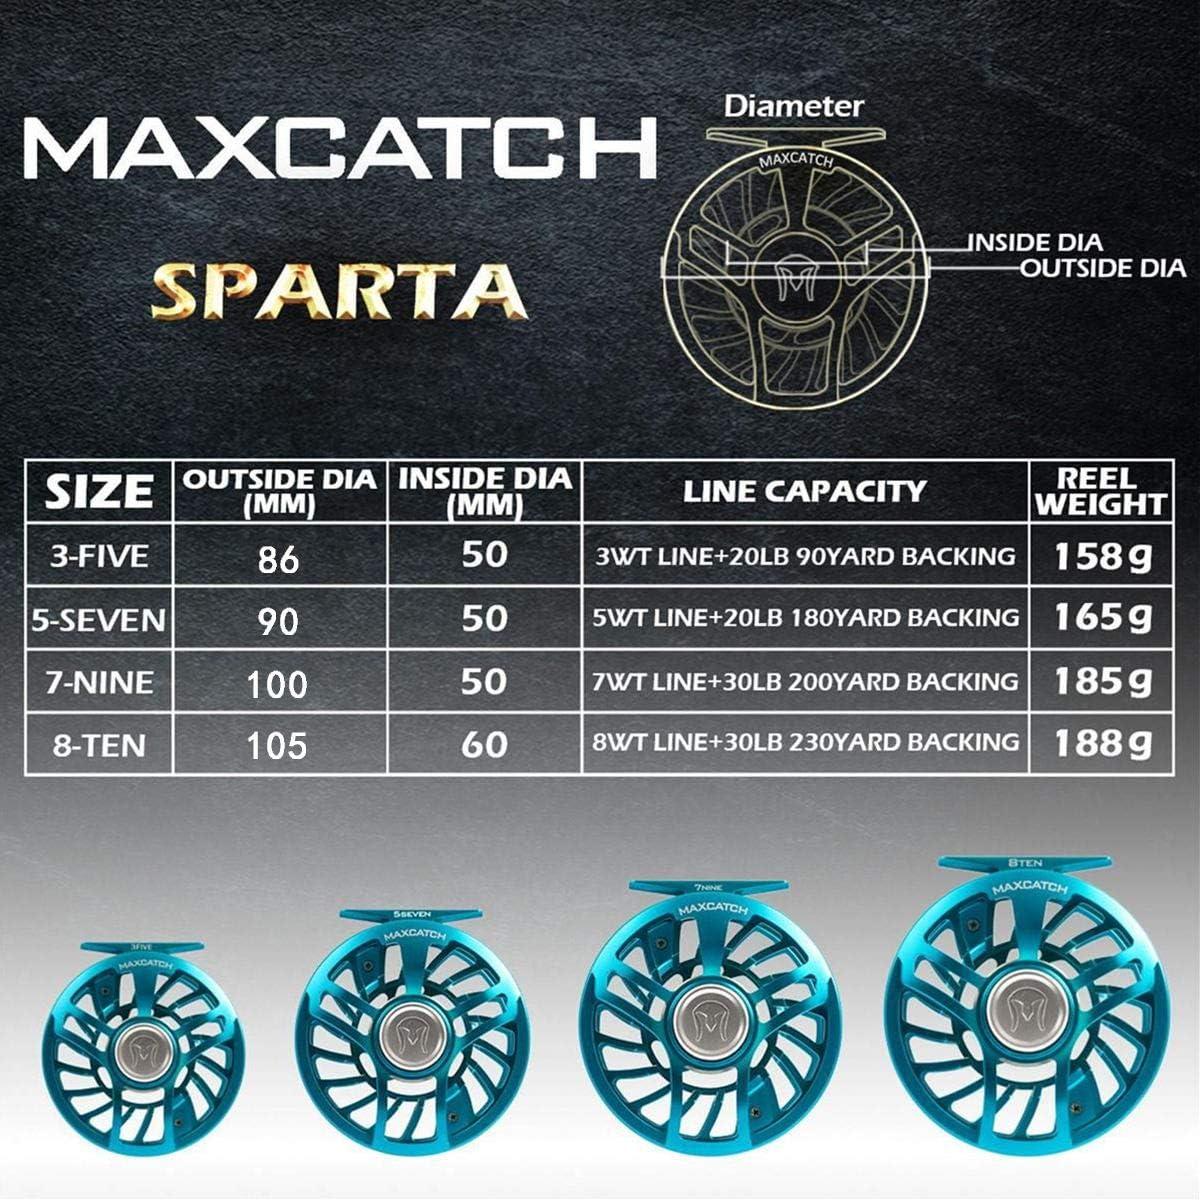 Maximumcatch Maxcatch Saltwater Fly Fishing Reel 100% Fully Sealed